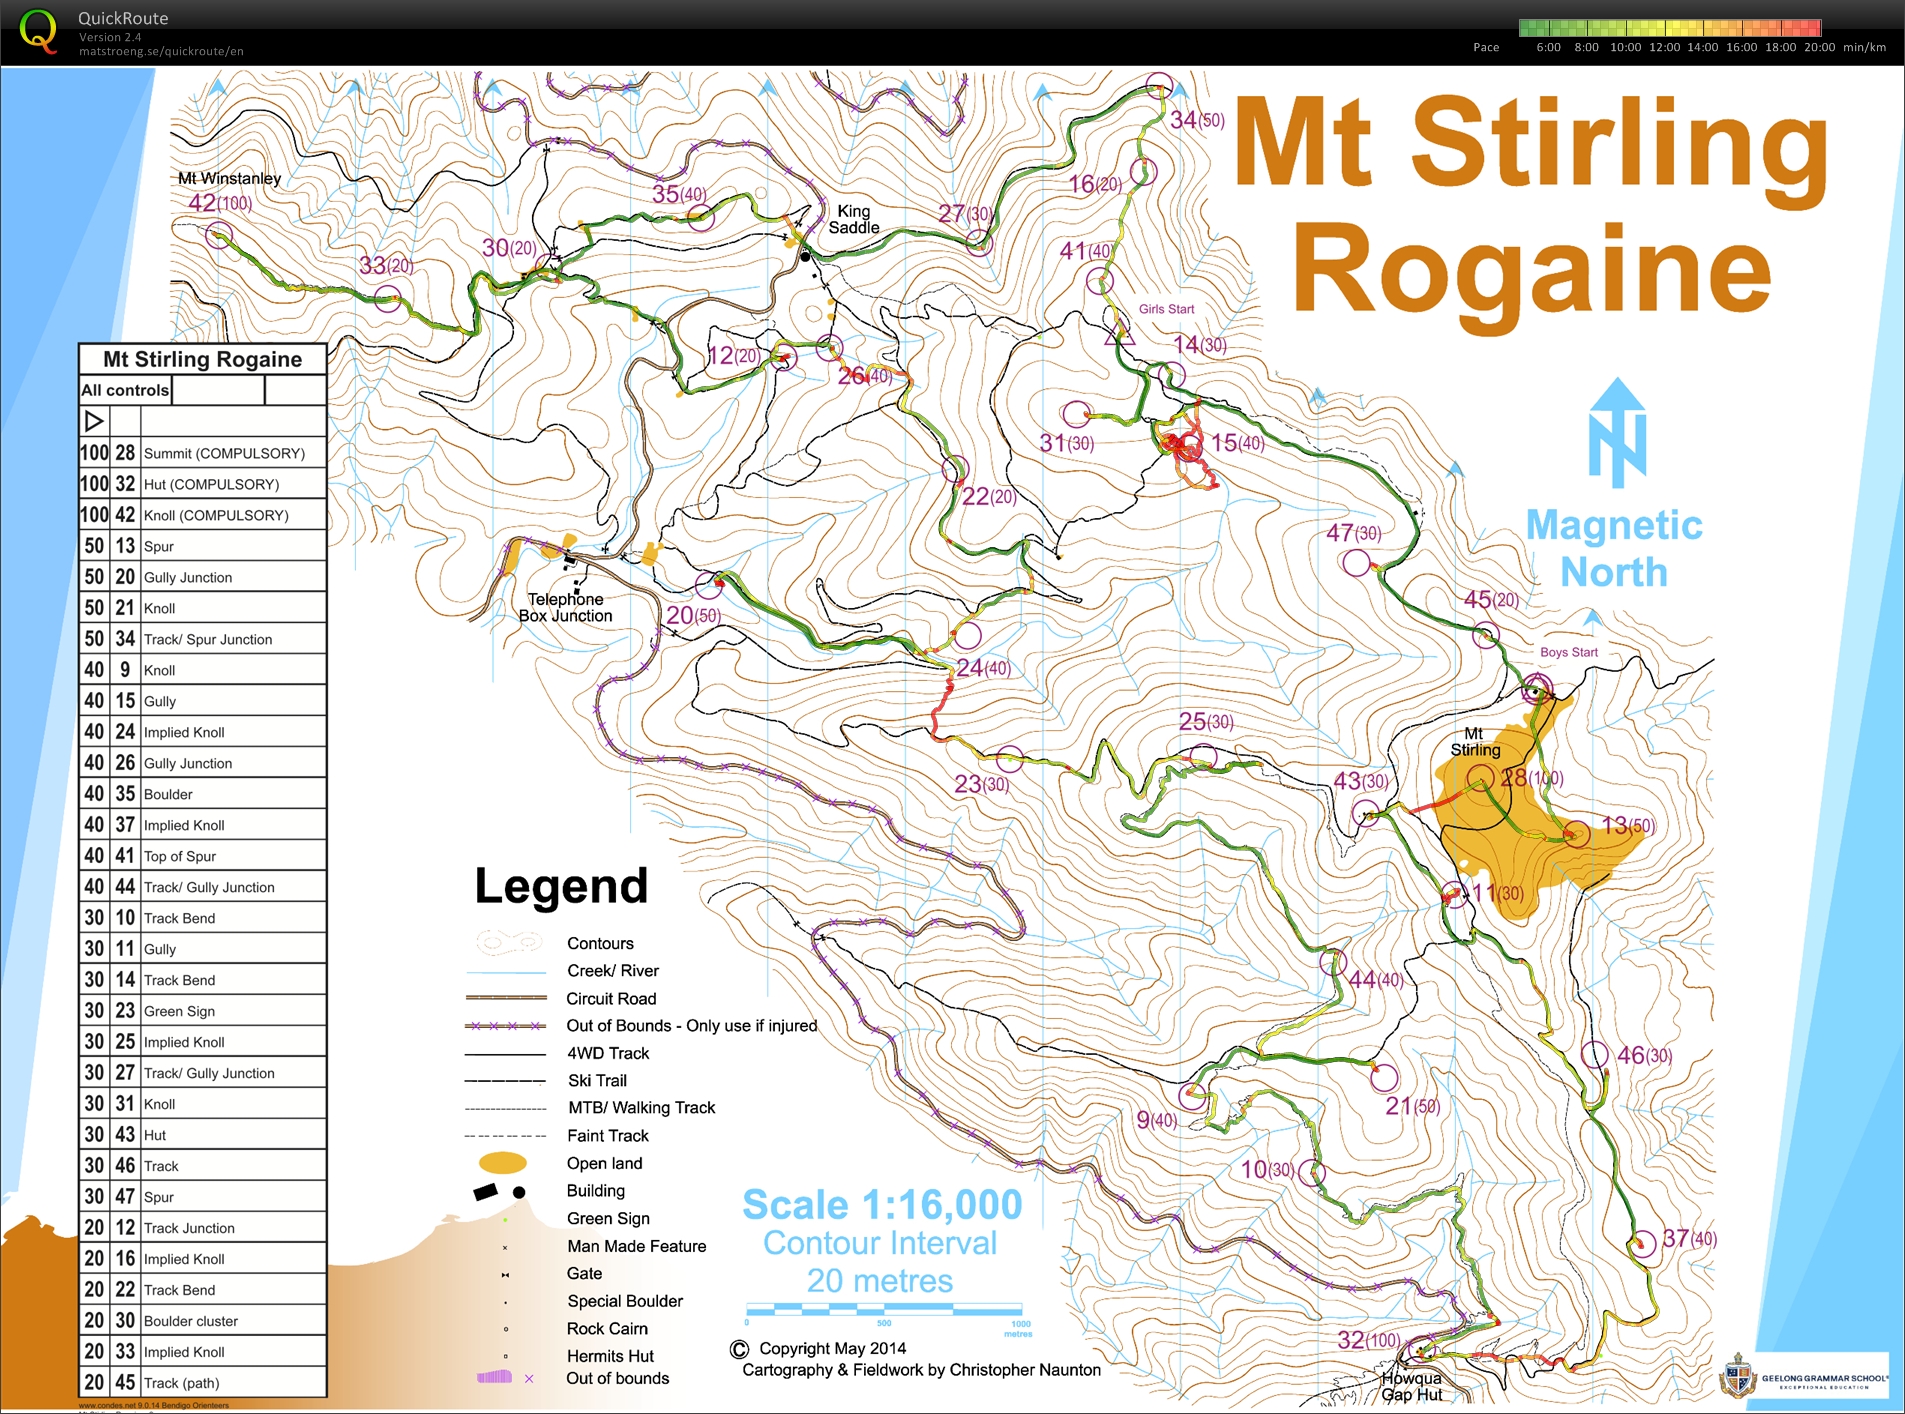 Mt Stirling Rogaine - Ross and Kat's run (05-11-2014)